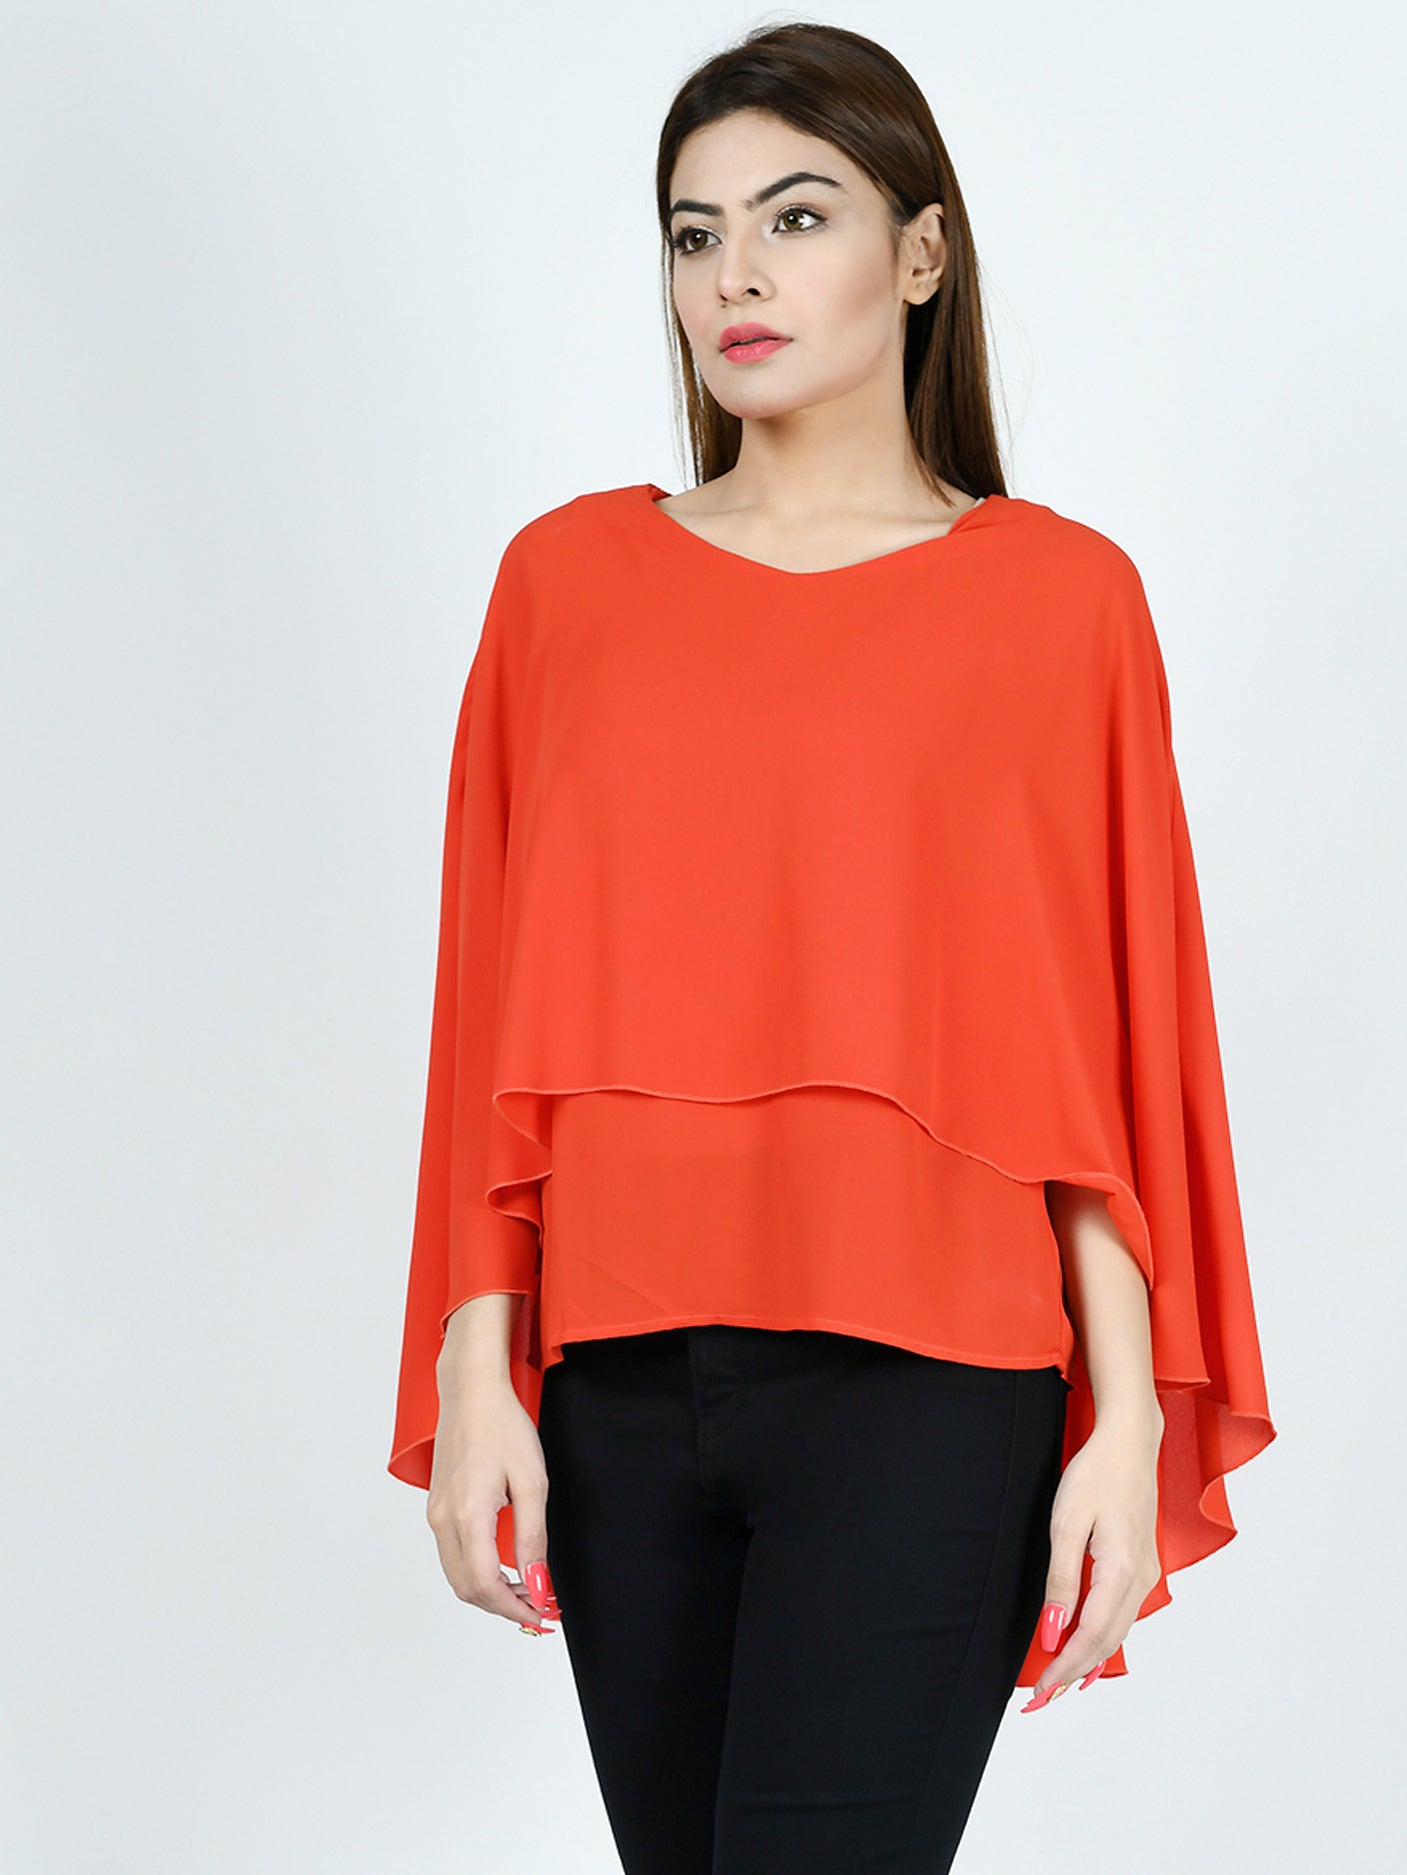 Layered Cape Style Top